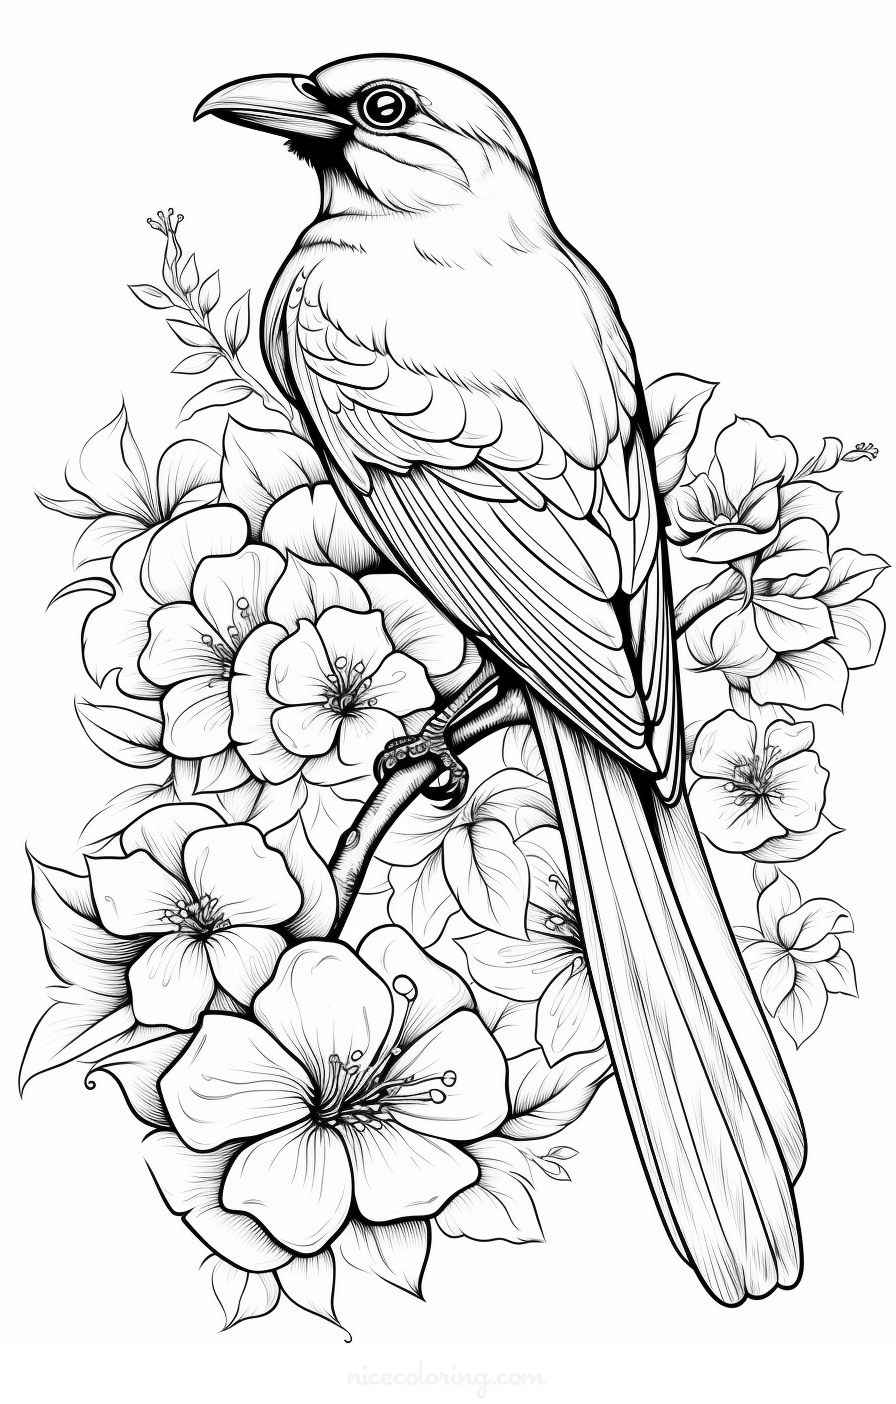 Birds singing on branches coloring page